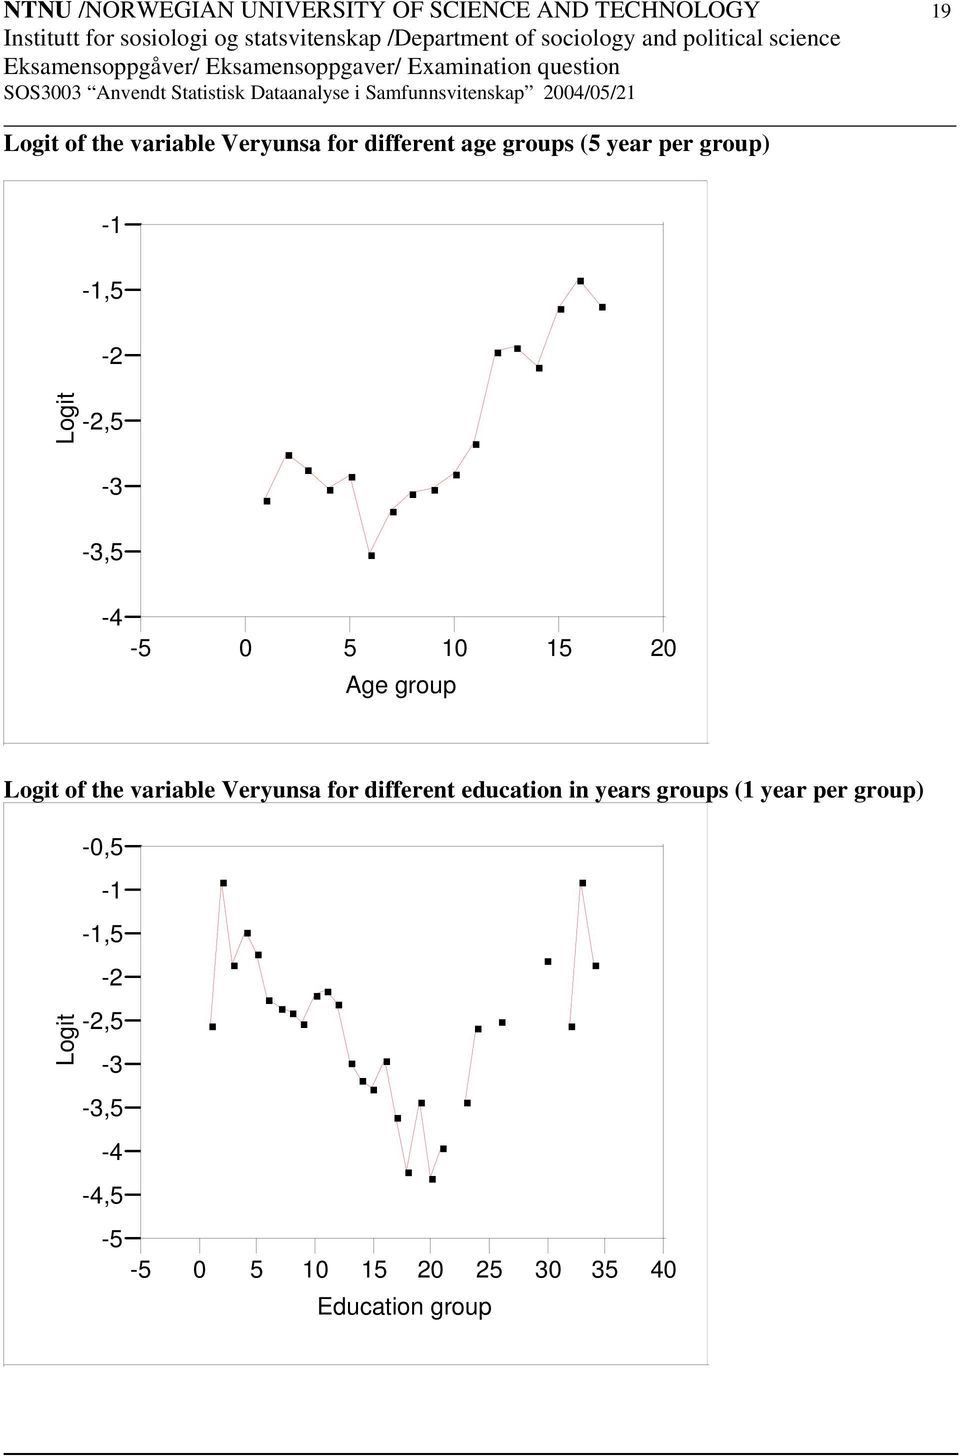 Age group Logit of the variable Veryunsa for different education in years groups (1 year